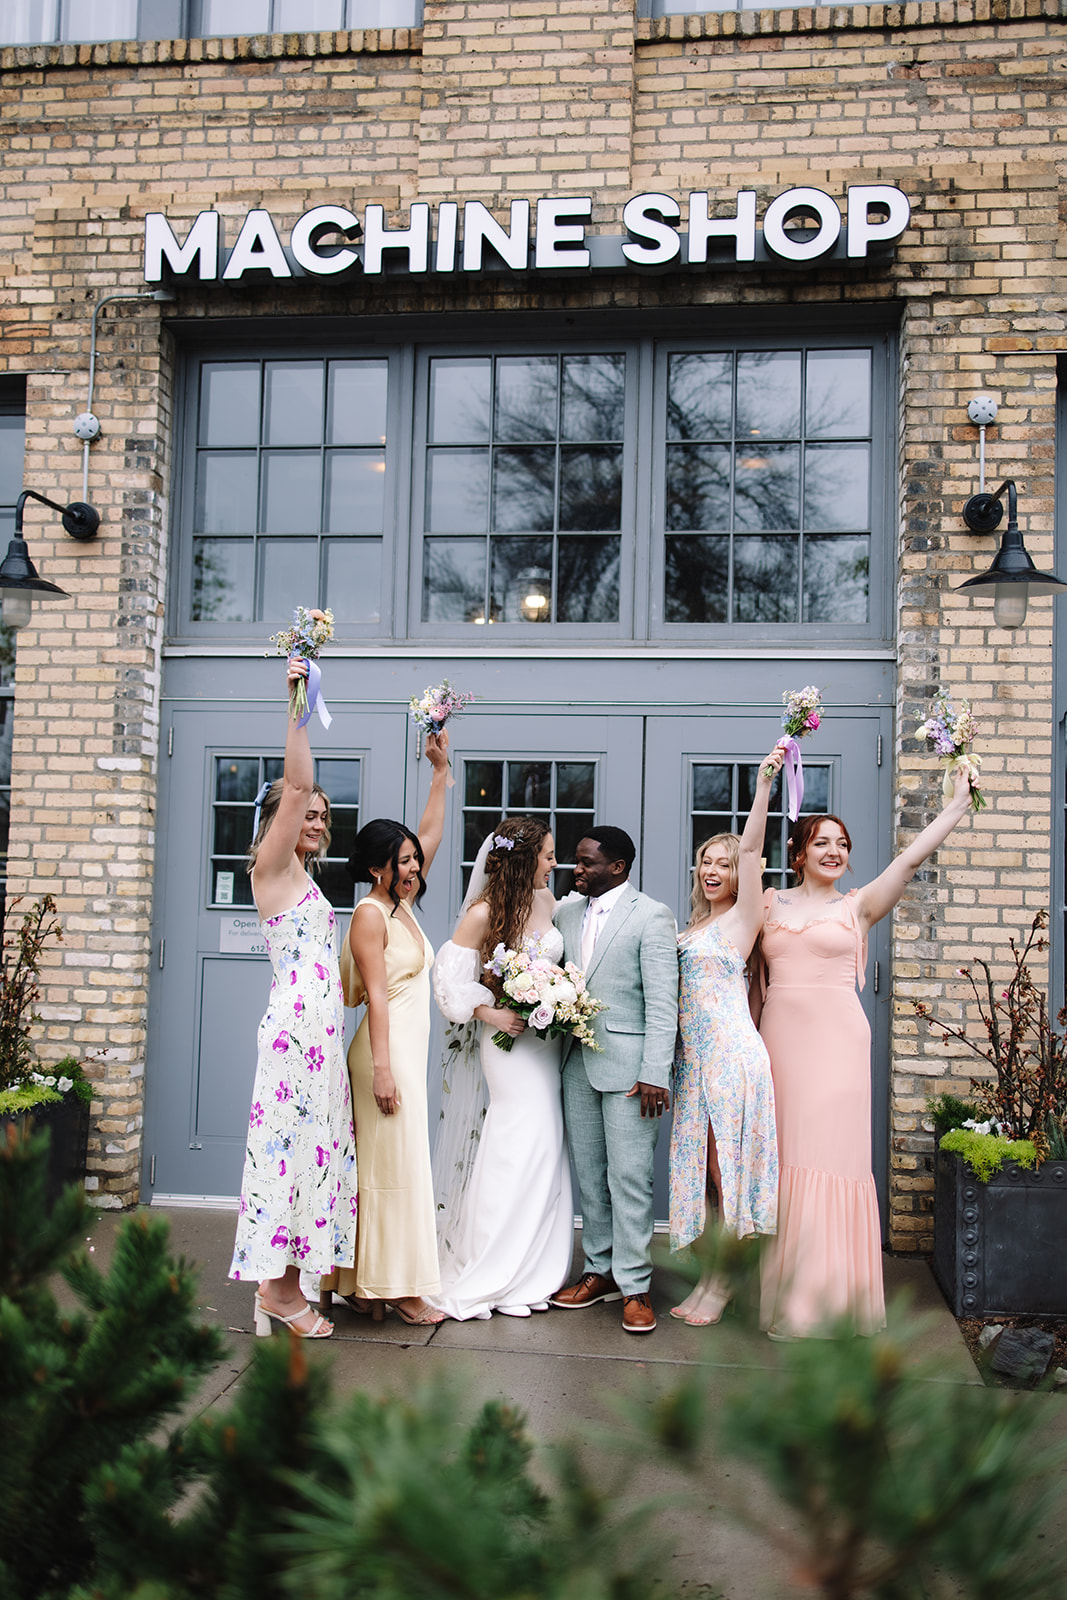 A wedding couple stands with their bridal party in front of a building labeled "Machine Shop." The group is dressed in formal attire, holding bouquets and smiling at each other.